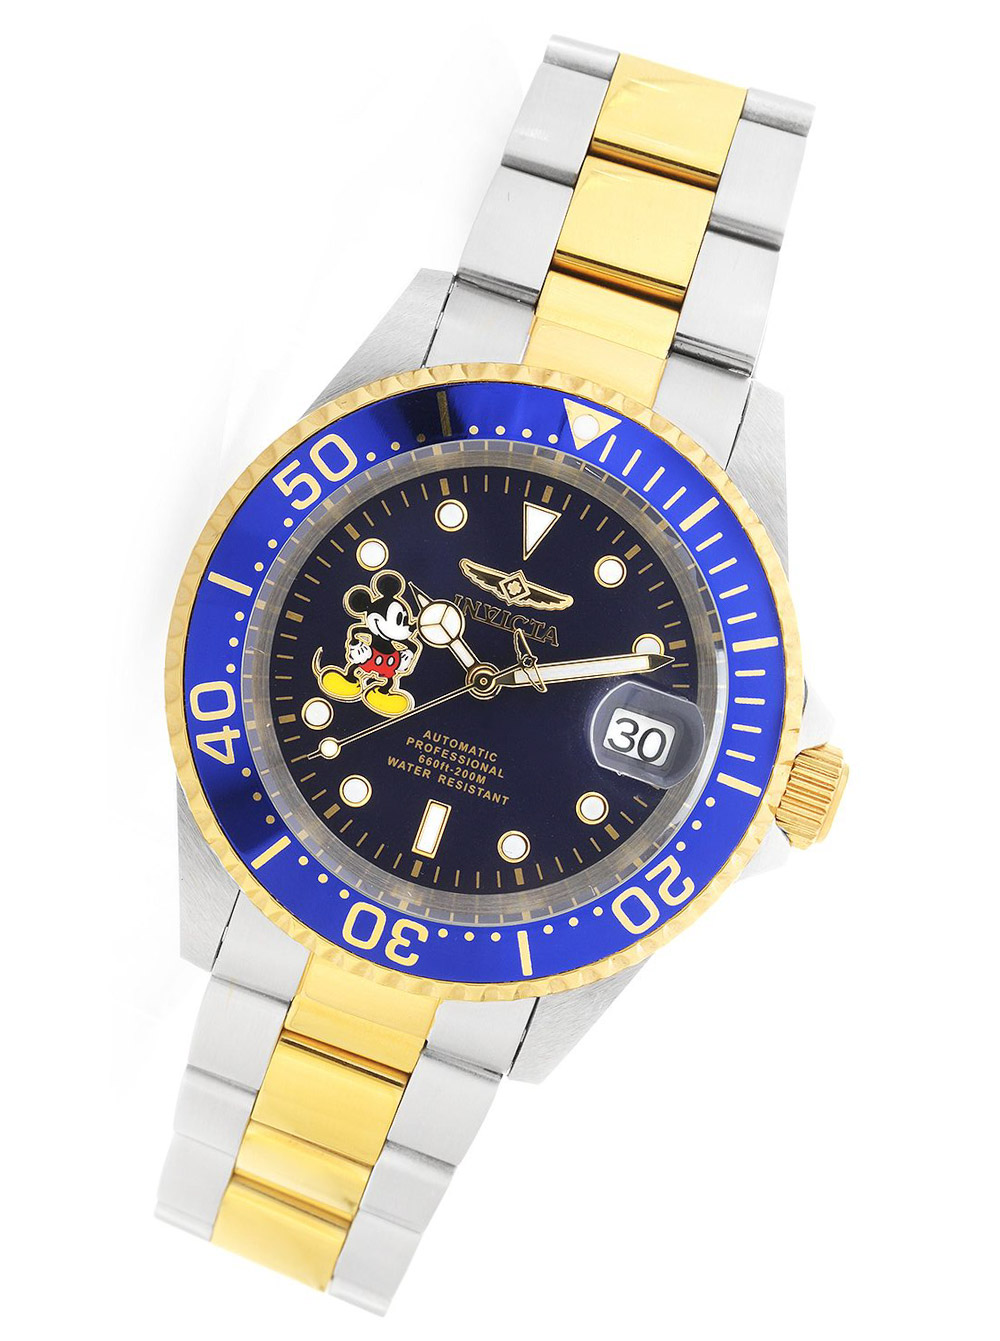 Invicta-Disney-limited-edition-watches-12